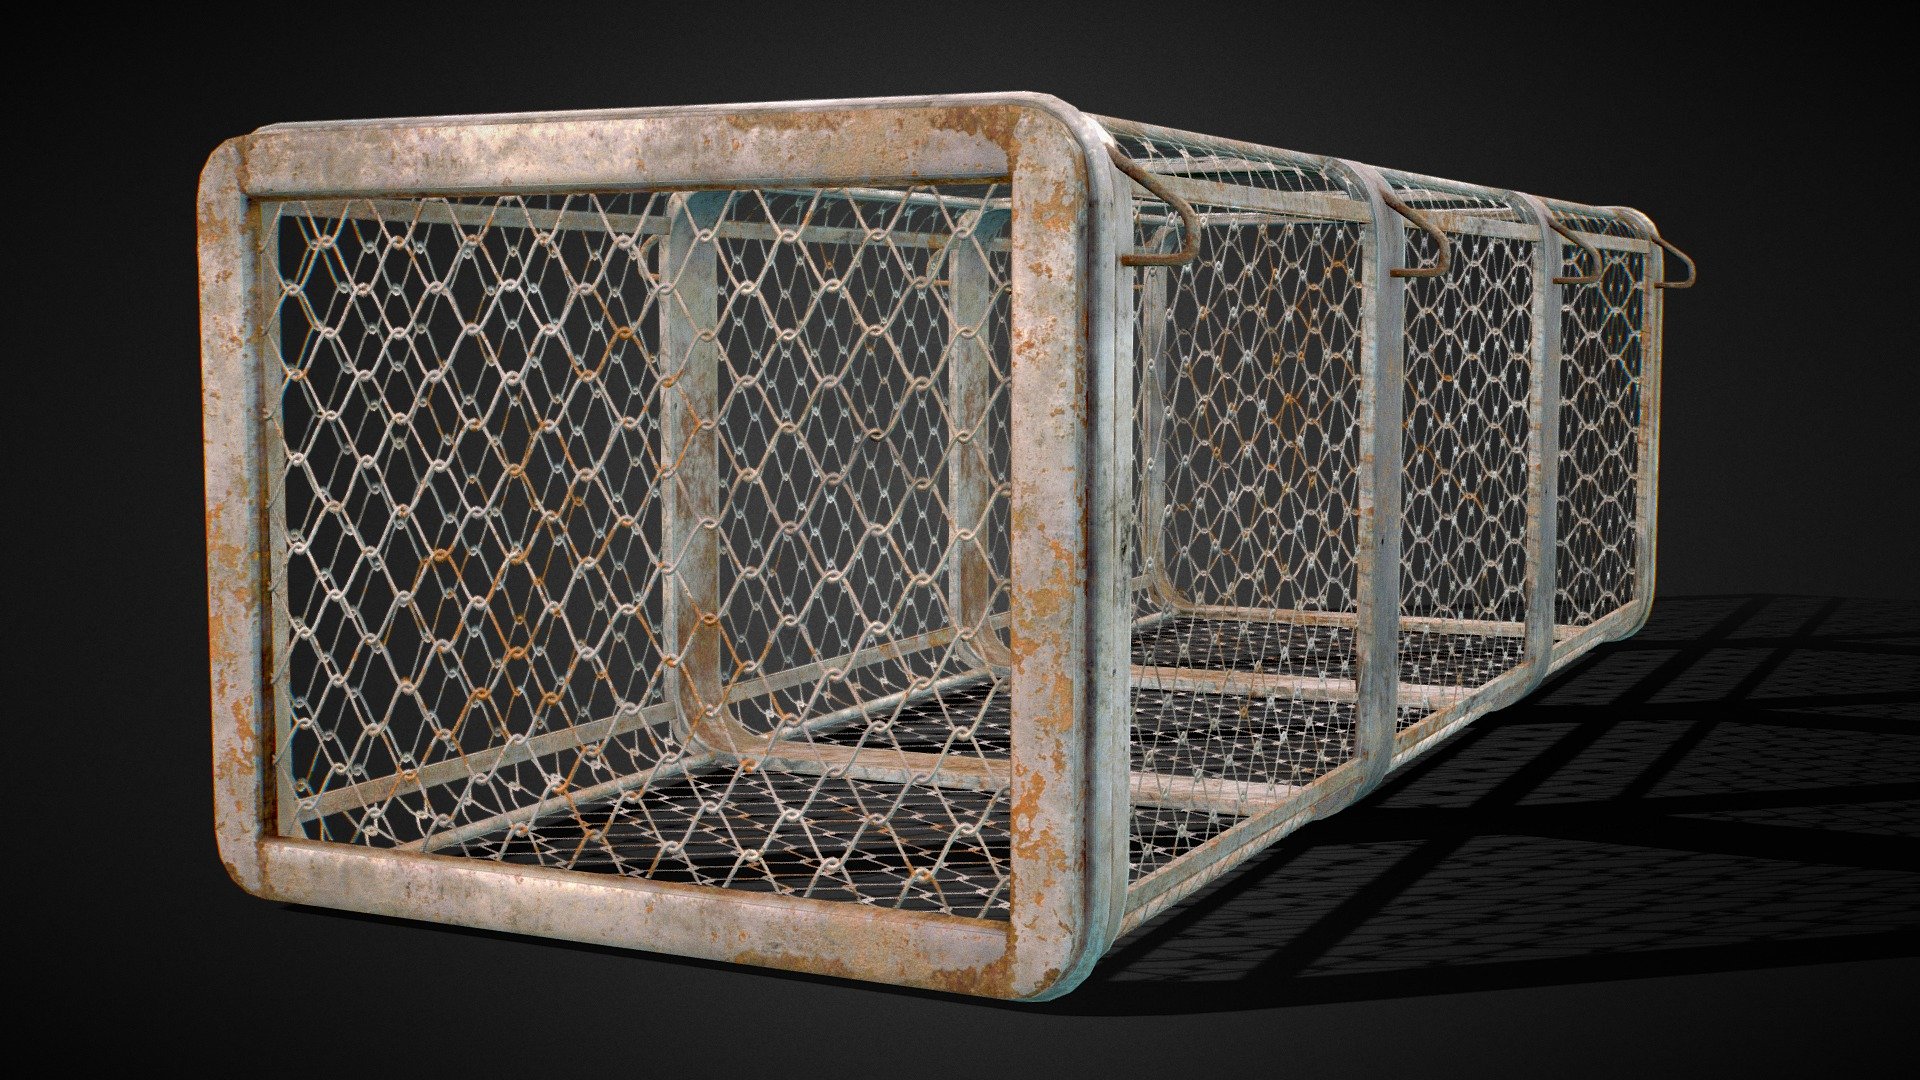 3D Cage Game Asset, the cage is suitable for reptiles like Alligatrors, Crocodiles, etc.
Was created originally for my game art project Alligator Farm https://www.artstation.com/artwork/XnrDVn
Maya used for Modeling, Uvs. Textures were done in Substance 3D Painter, Textures are in 4K, but I attached an additional 2K files for better optimized asset inside Game Engines like Unreal 3d model